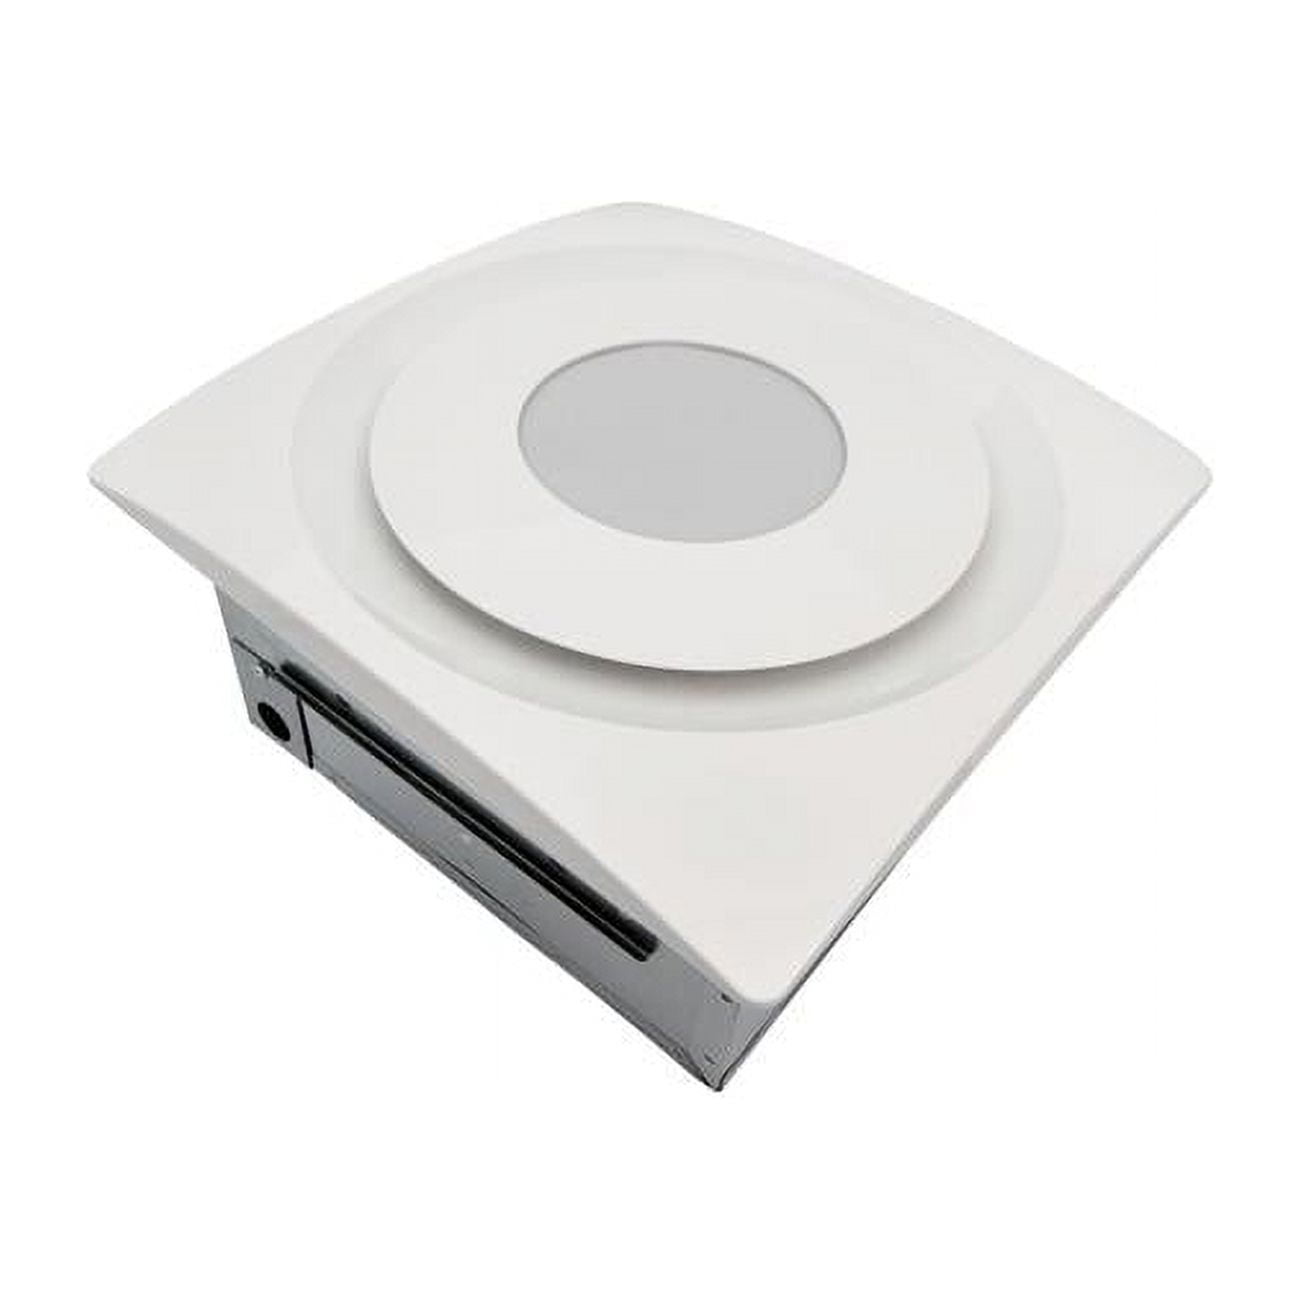 Picture of Aero Pure AP904-SL W 90 CFM Quiet Bathroom Fan with LED Light - White